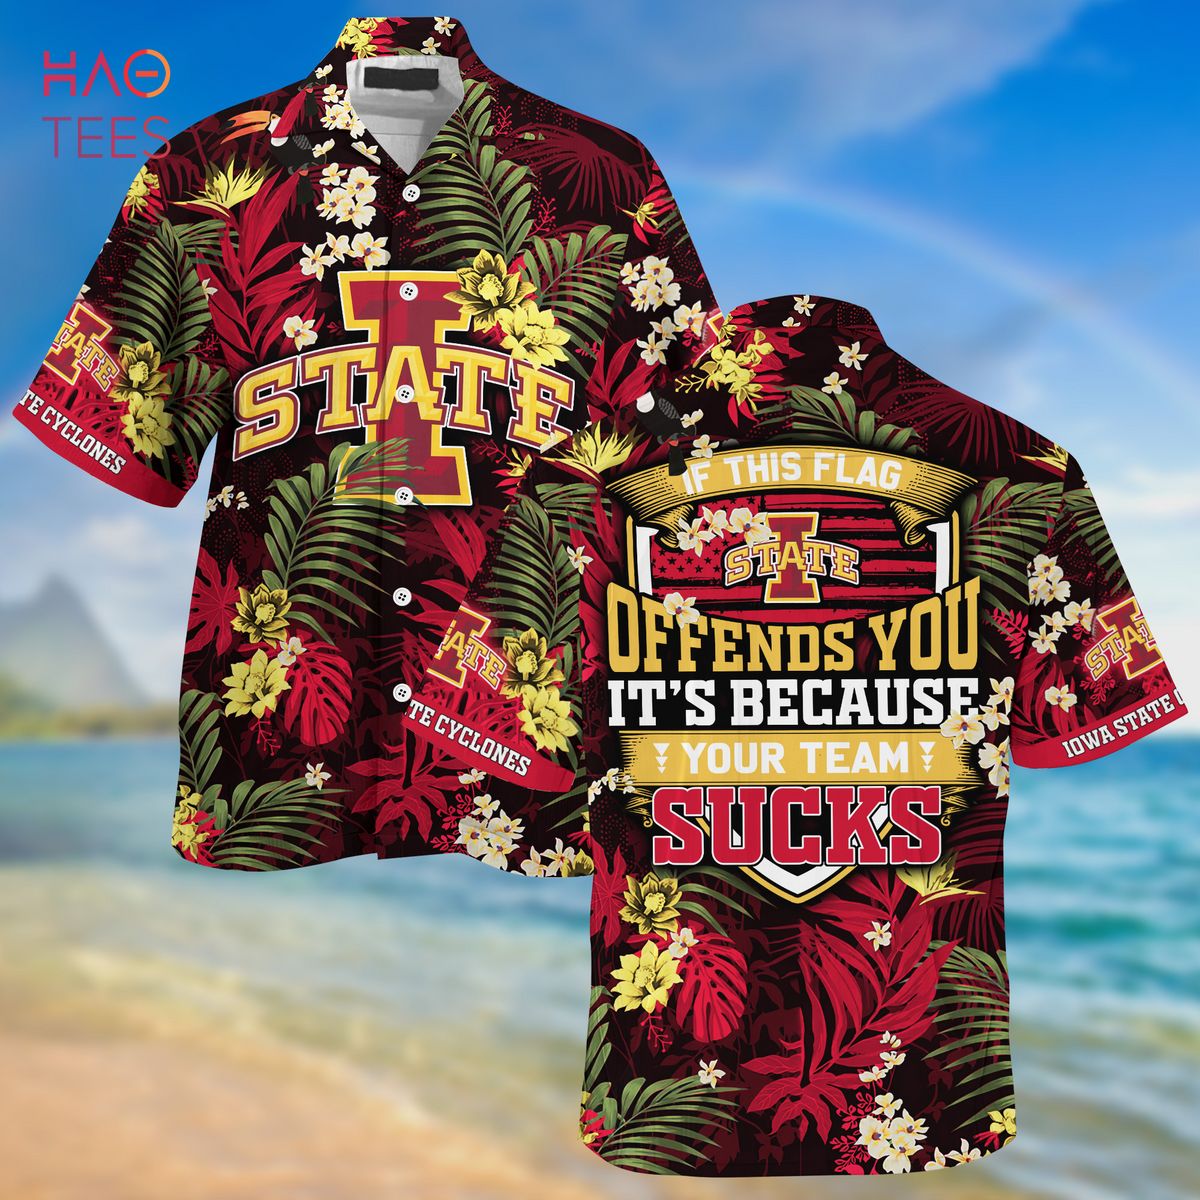 [LIMITED] Iowa State Cyclones  Summer Hawaiian Shirt And Shorts,  With Tropical Patterns For Fans